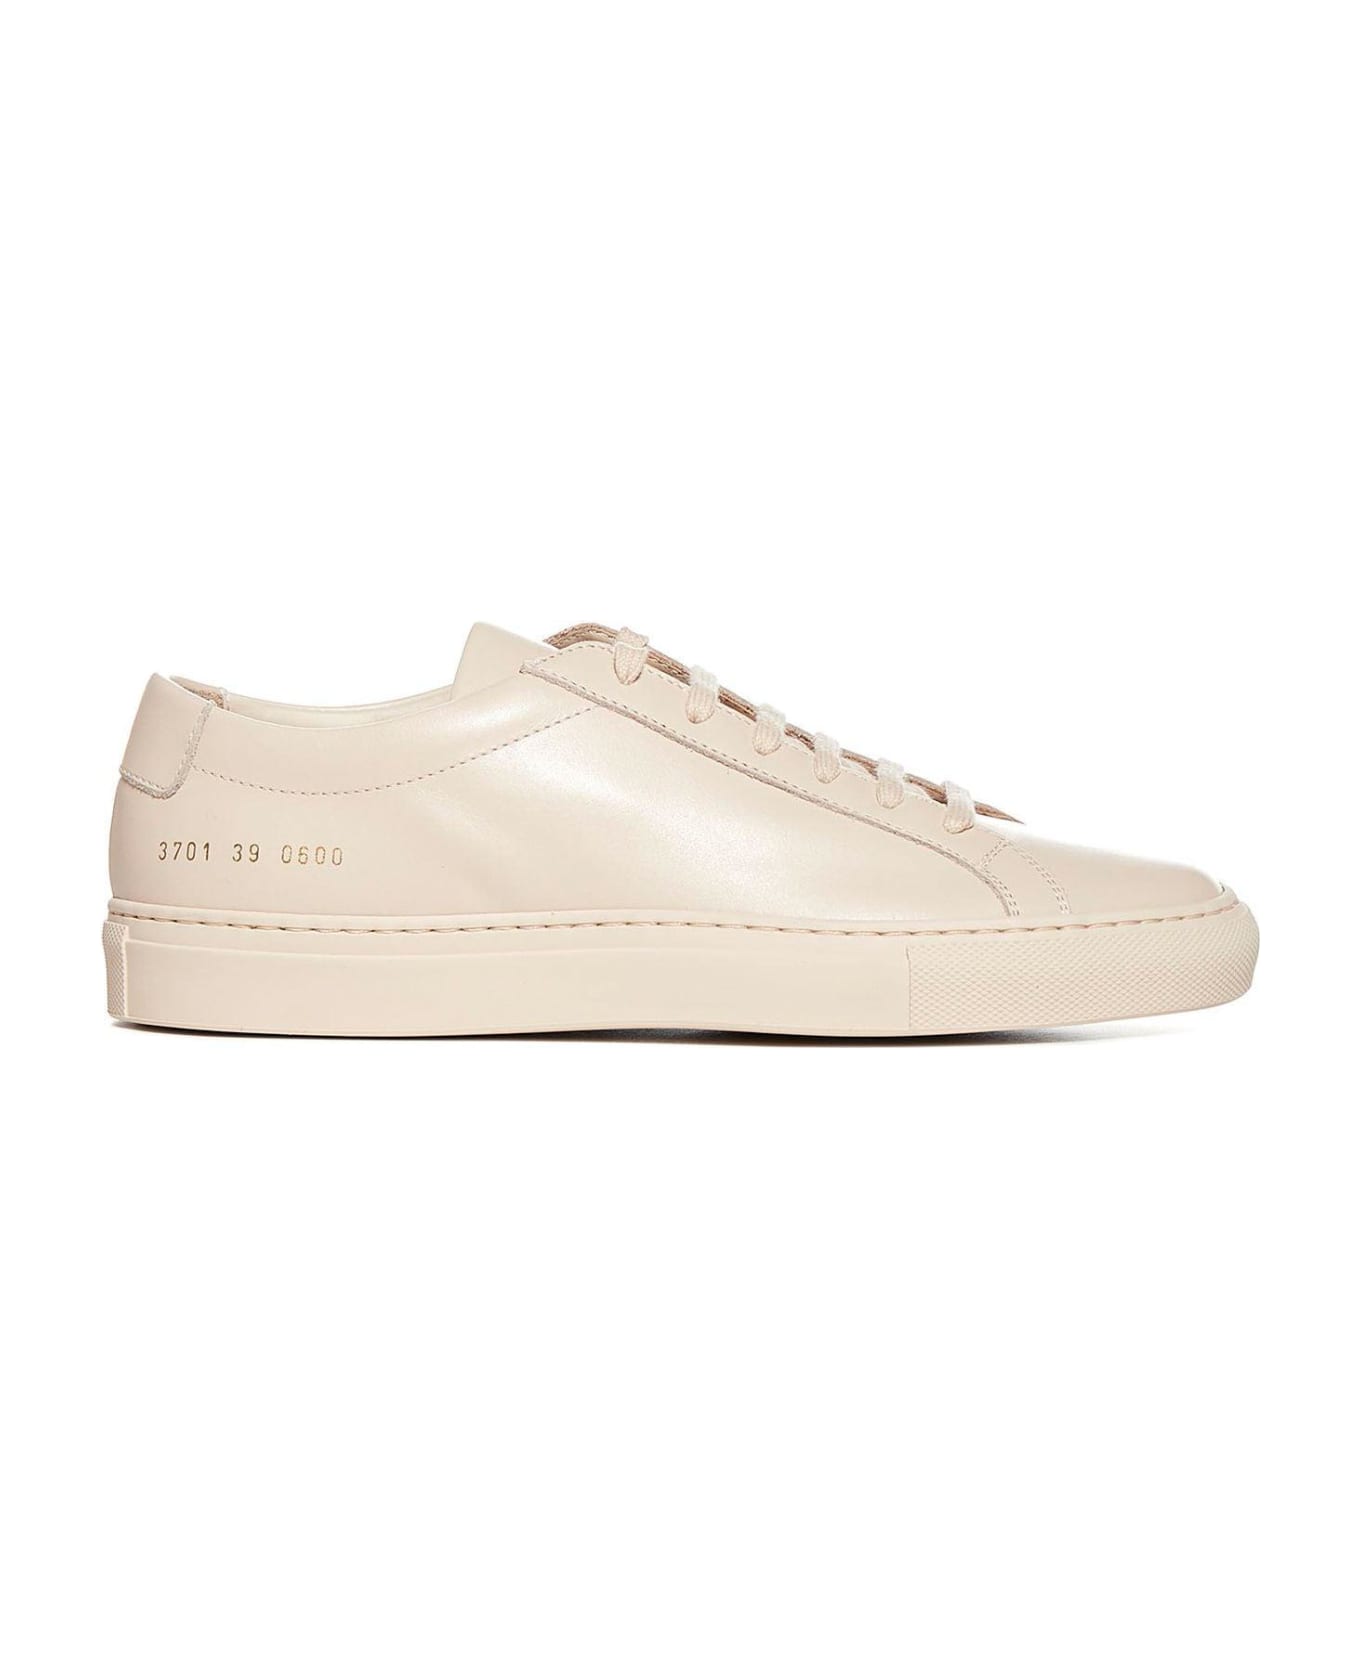 Common Projects Original Achilles Lace-up Sneakers - Cipria